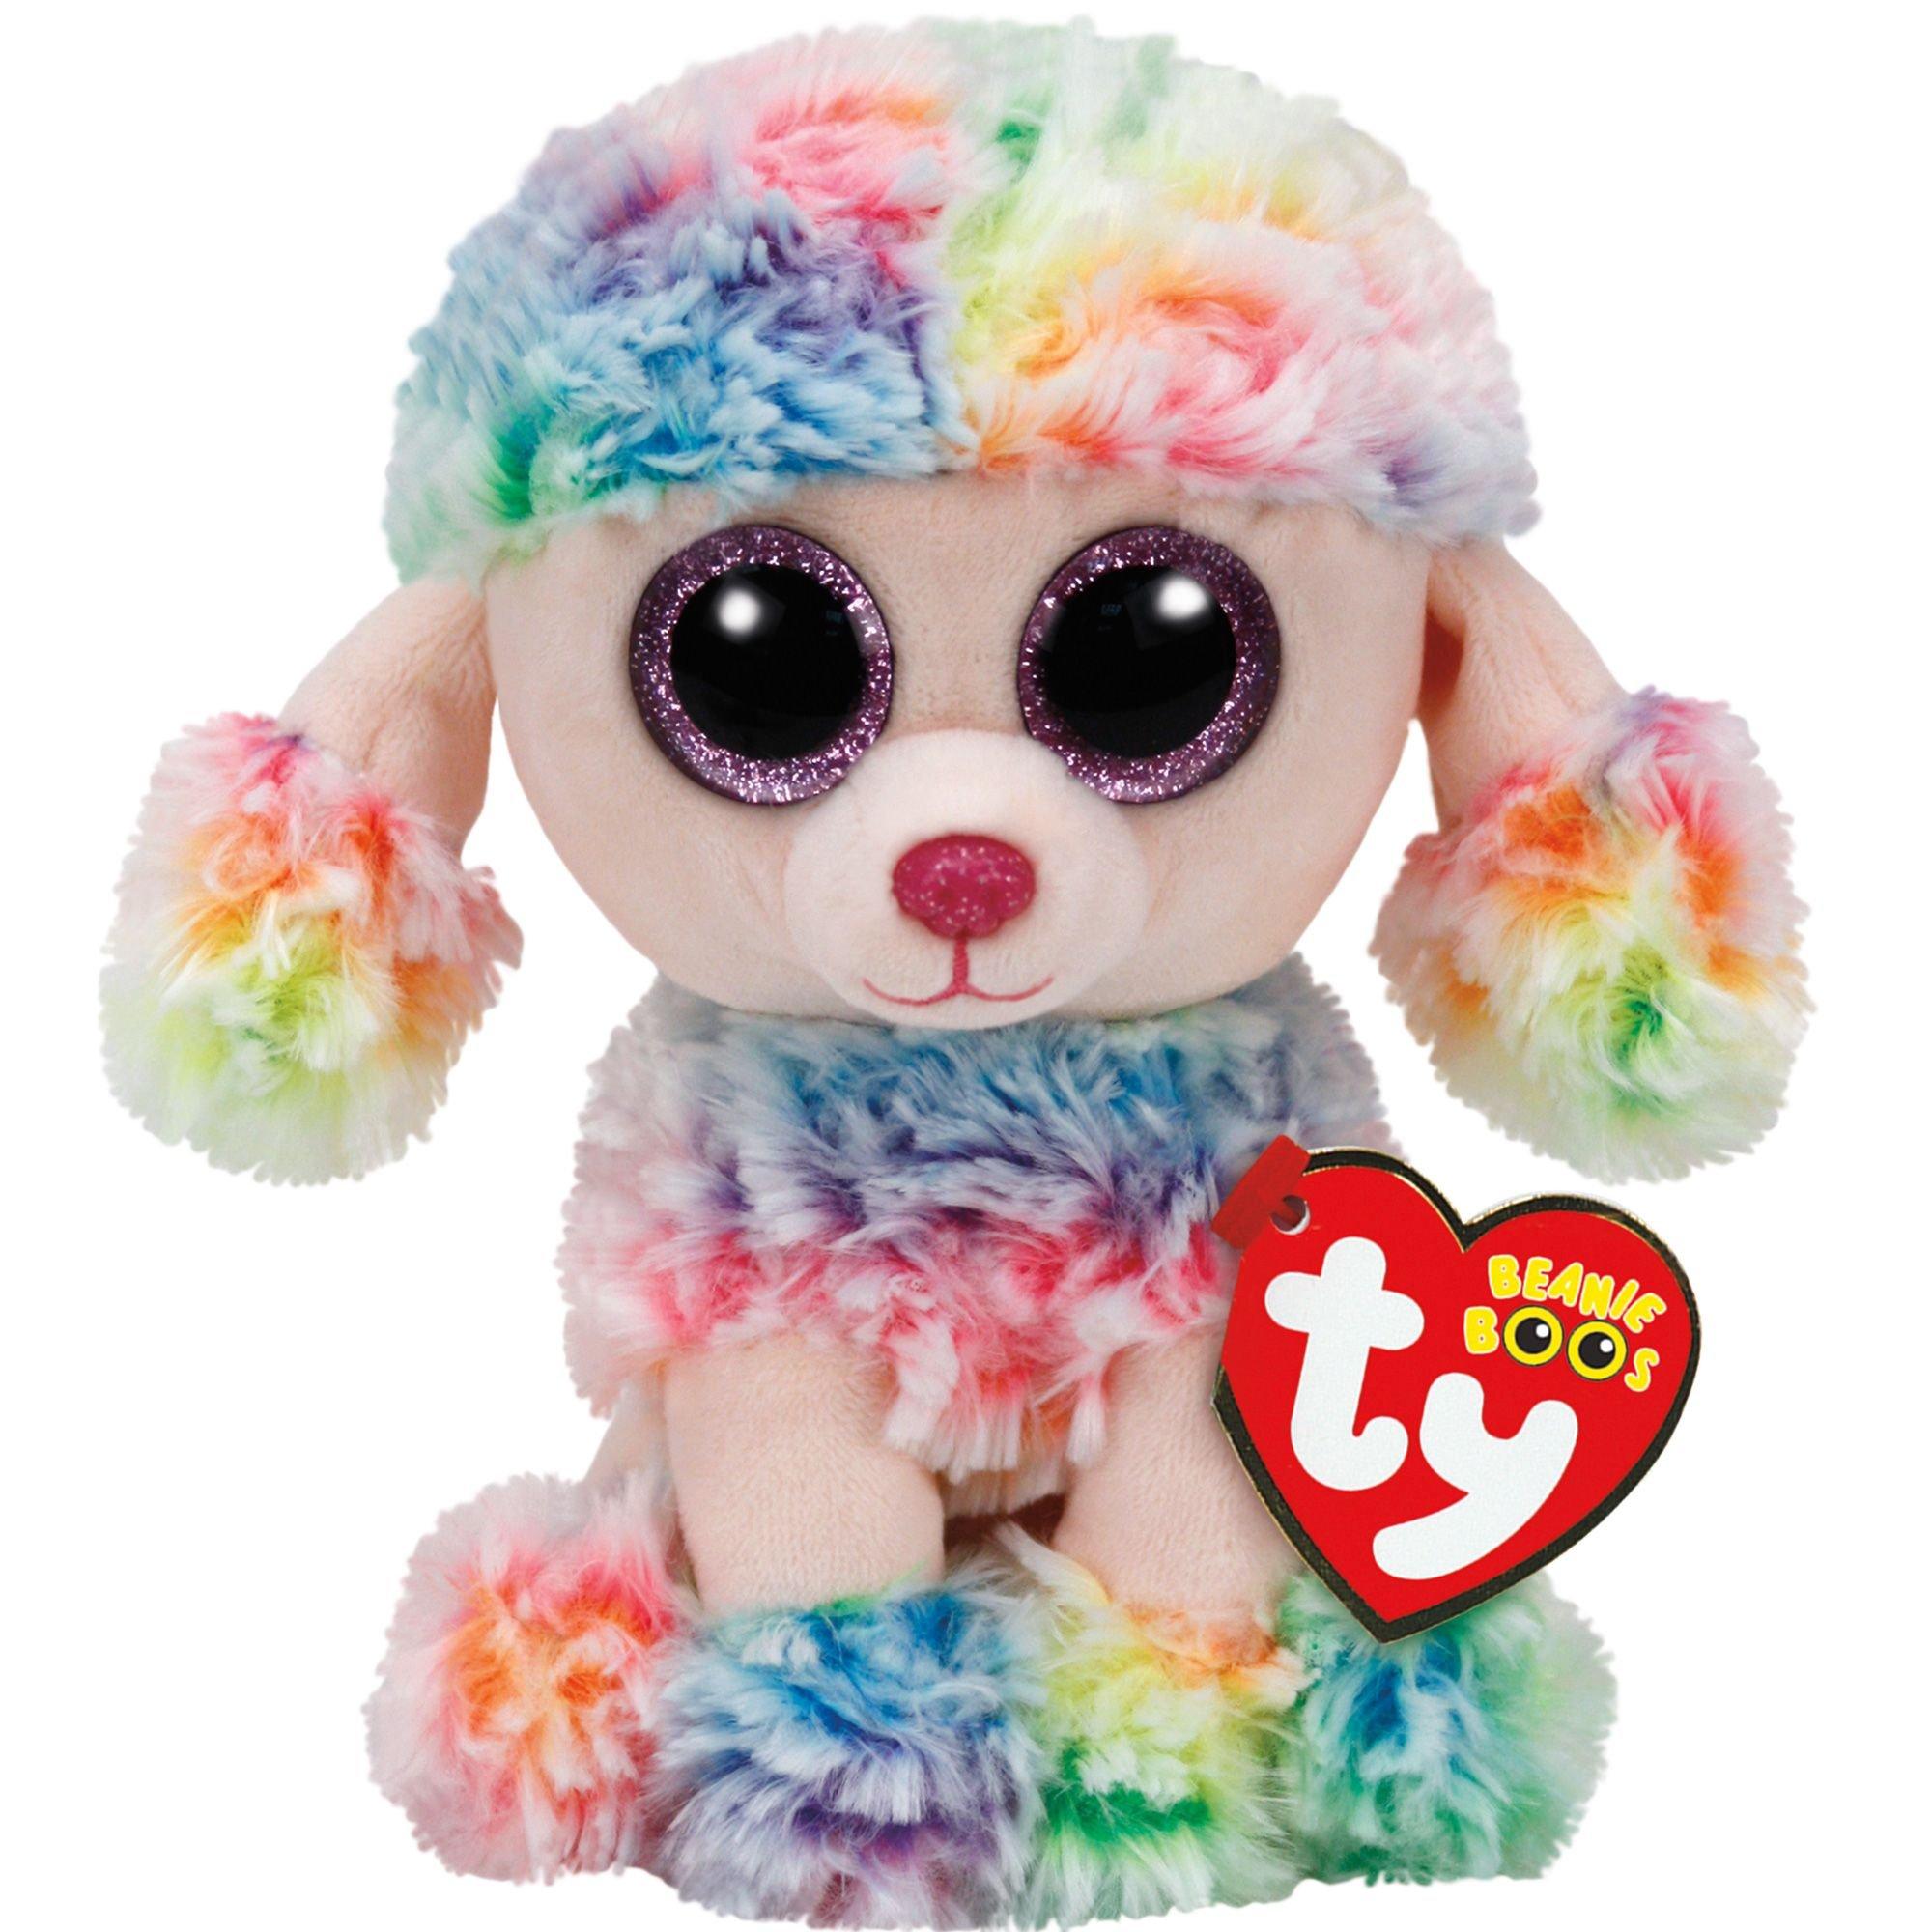 Rainbow Beanie Boo Poodle Dog Plush 6in x 6in